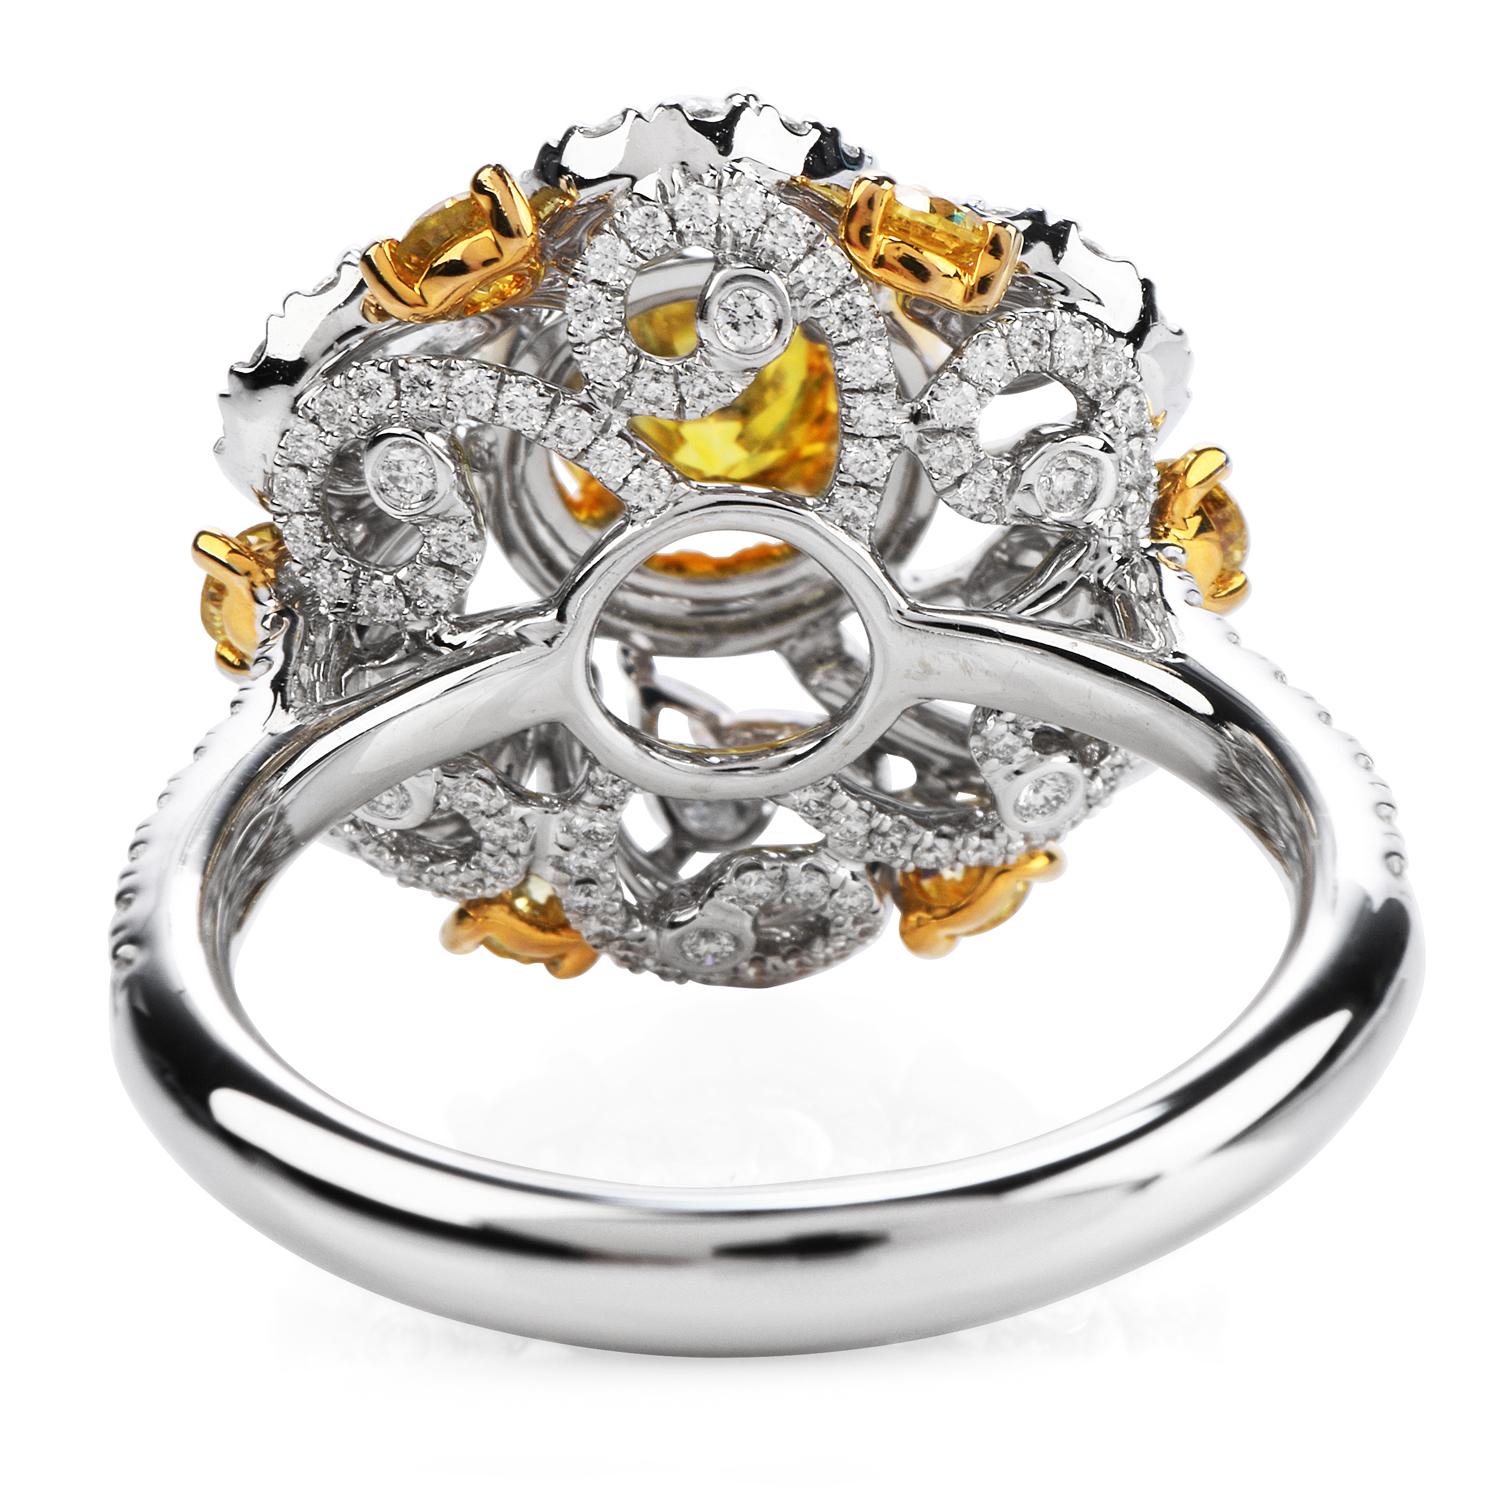 The deep yellow color on this Flower inspired Diamond Engagement ring, 

Crafted in solid 18K white & yellow gold, the center is adorned by a GIA certified fancy vivid Yellow Diamond, round-shaped, prong cut, weighing in a total of 0.64 carats (I1